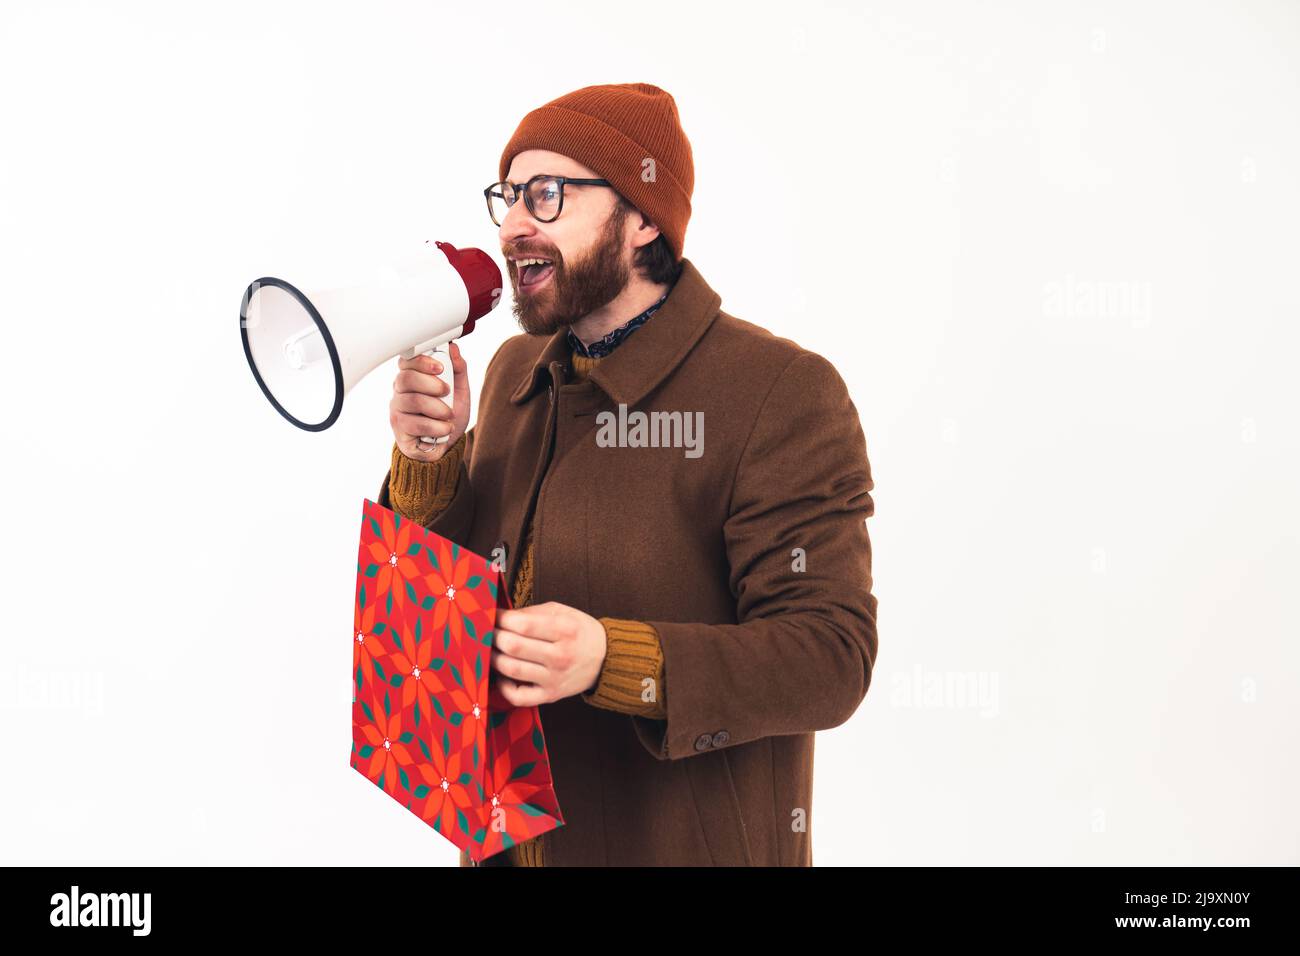 Caucasian man with a megaphone. Studio shot of a millennial bearded guy in a beanie and brown coat holding a loudspeaker and a gift bag over white background,. High quality photo Stock Photo